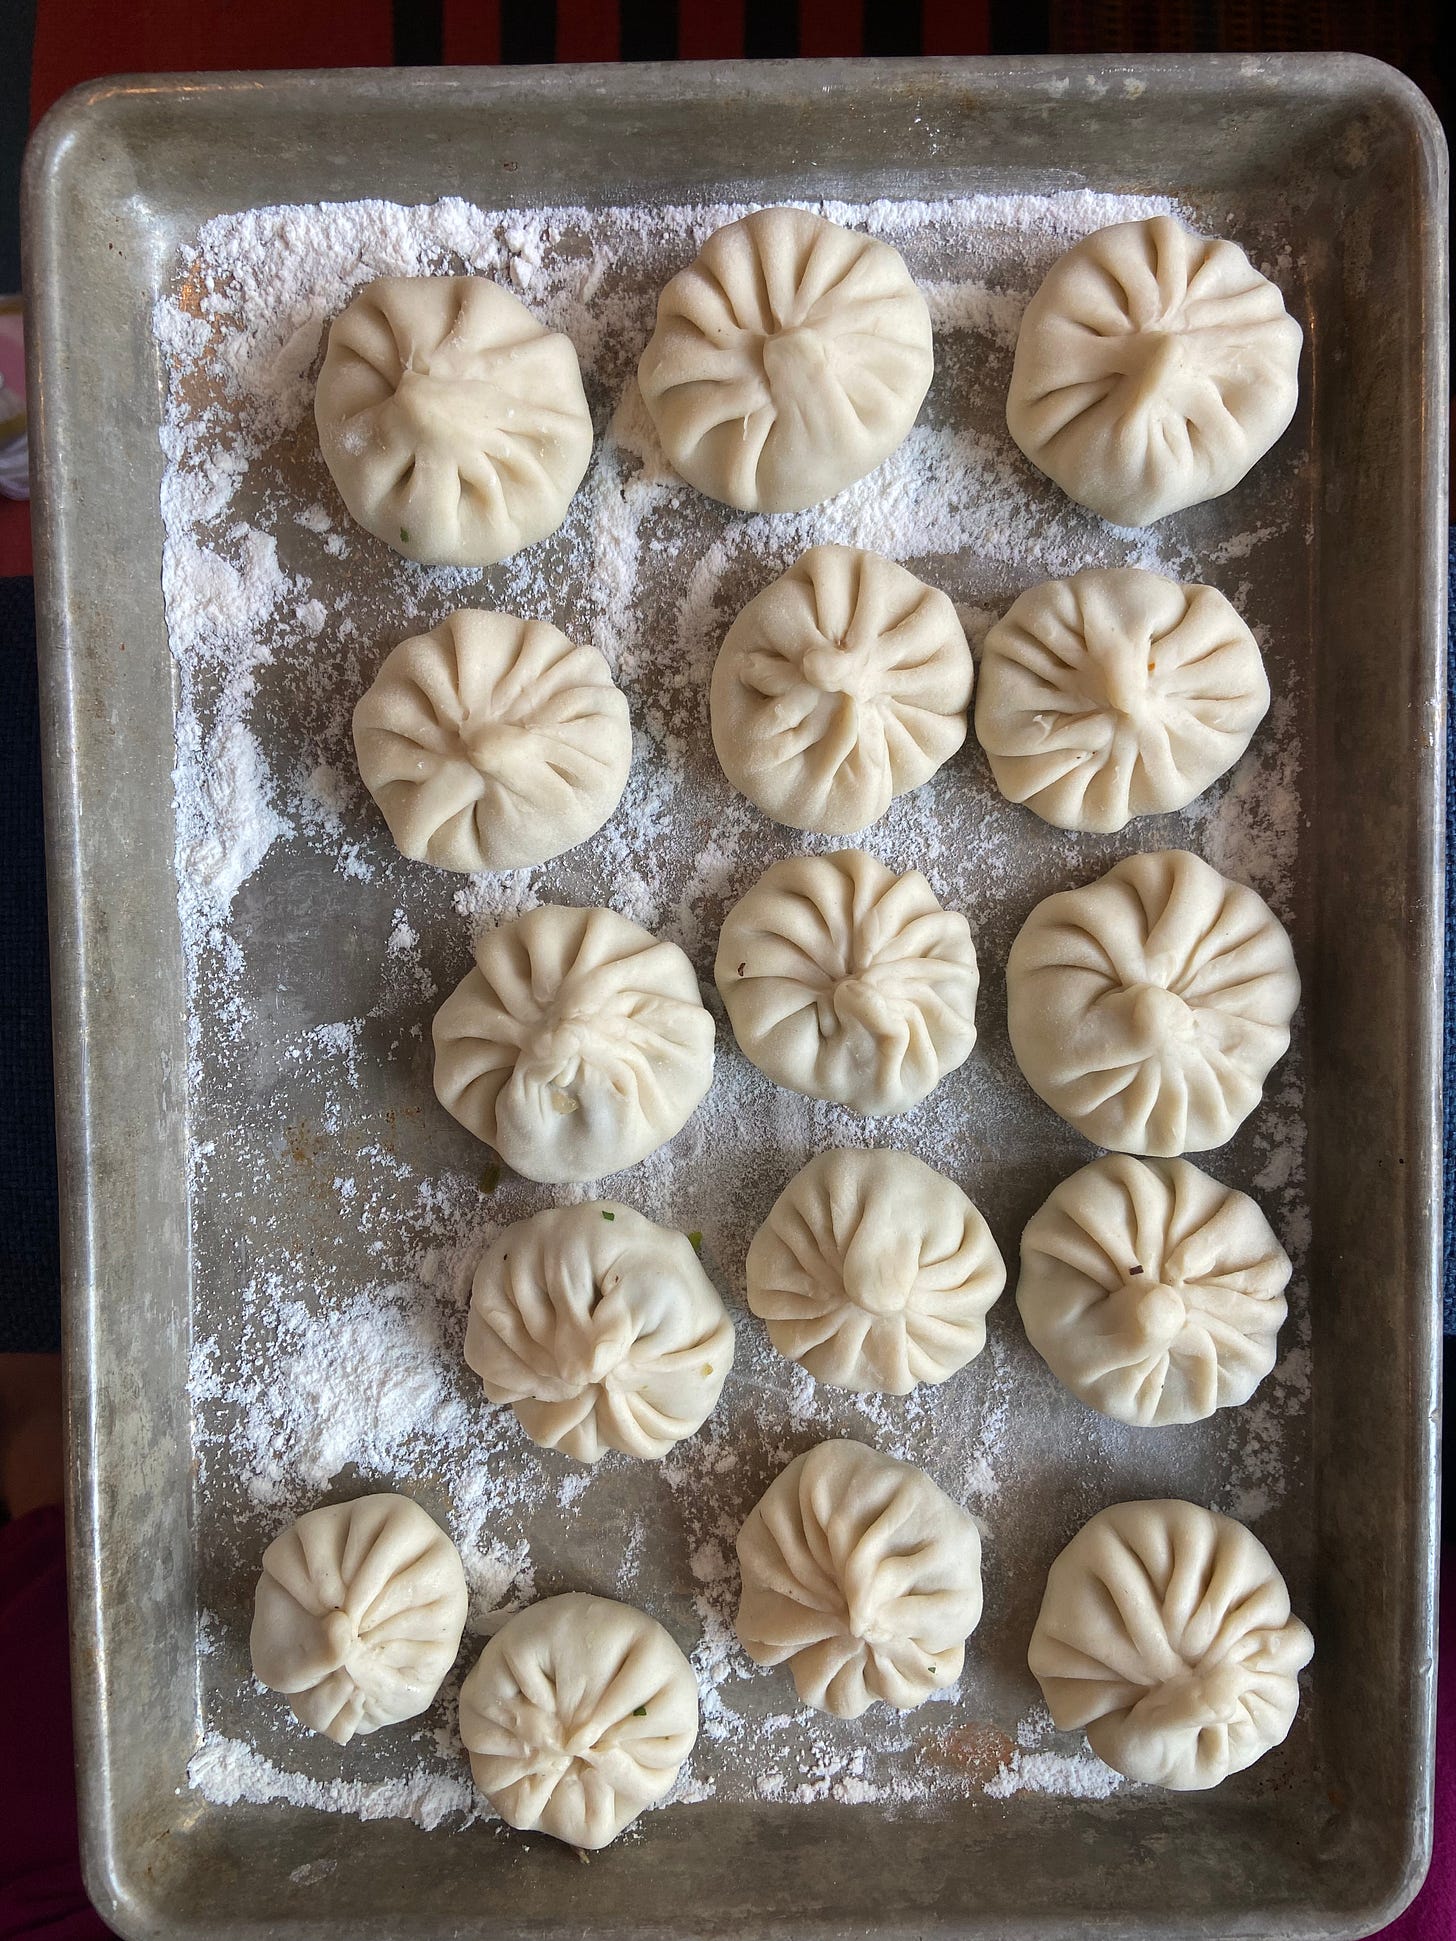 An overheard image of round pleated khinkali on a metal tray